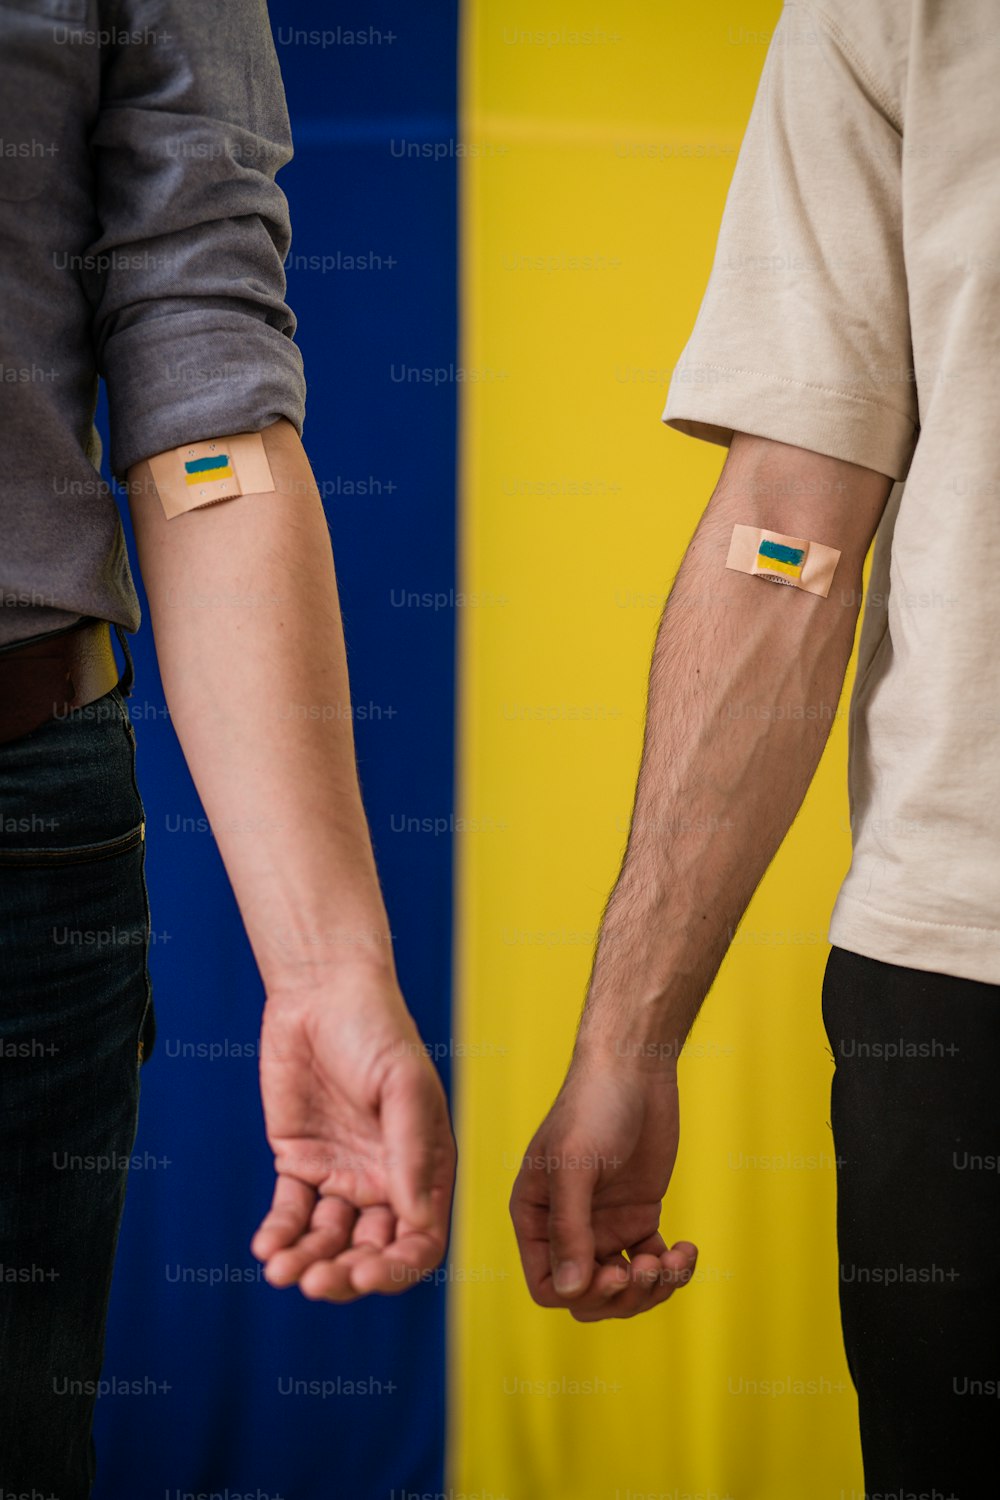 Blood donors with a bandage after giving blood on Ukrainian flag background.